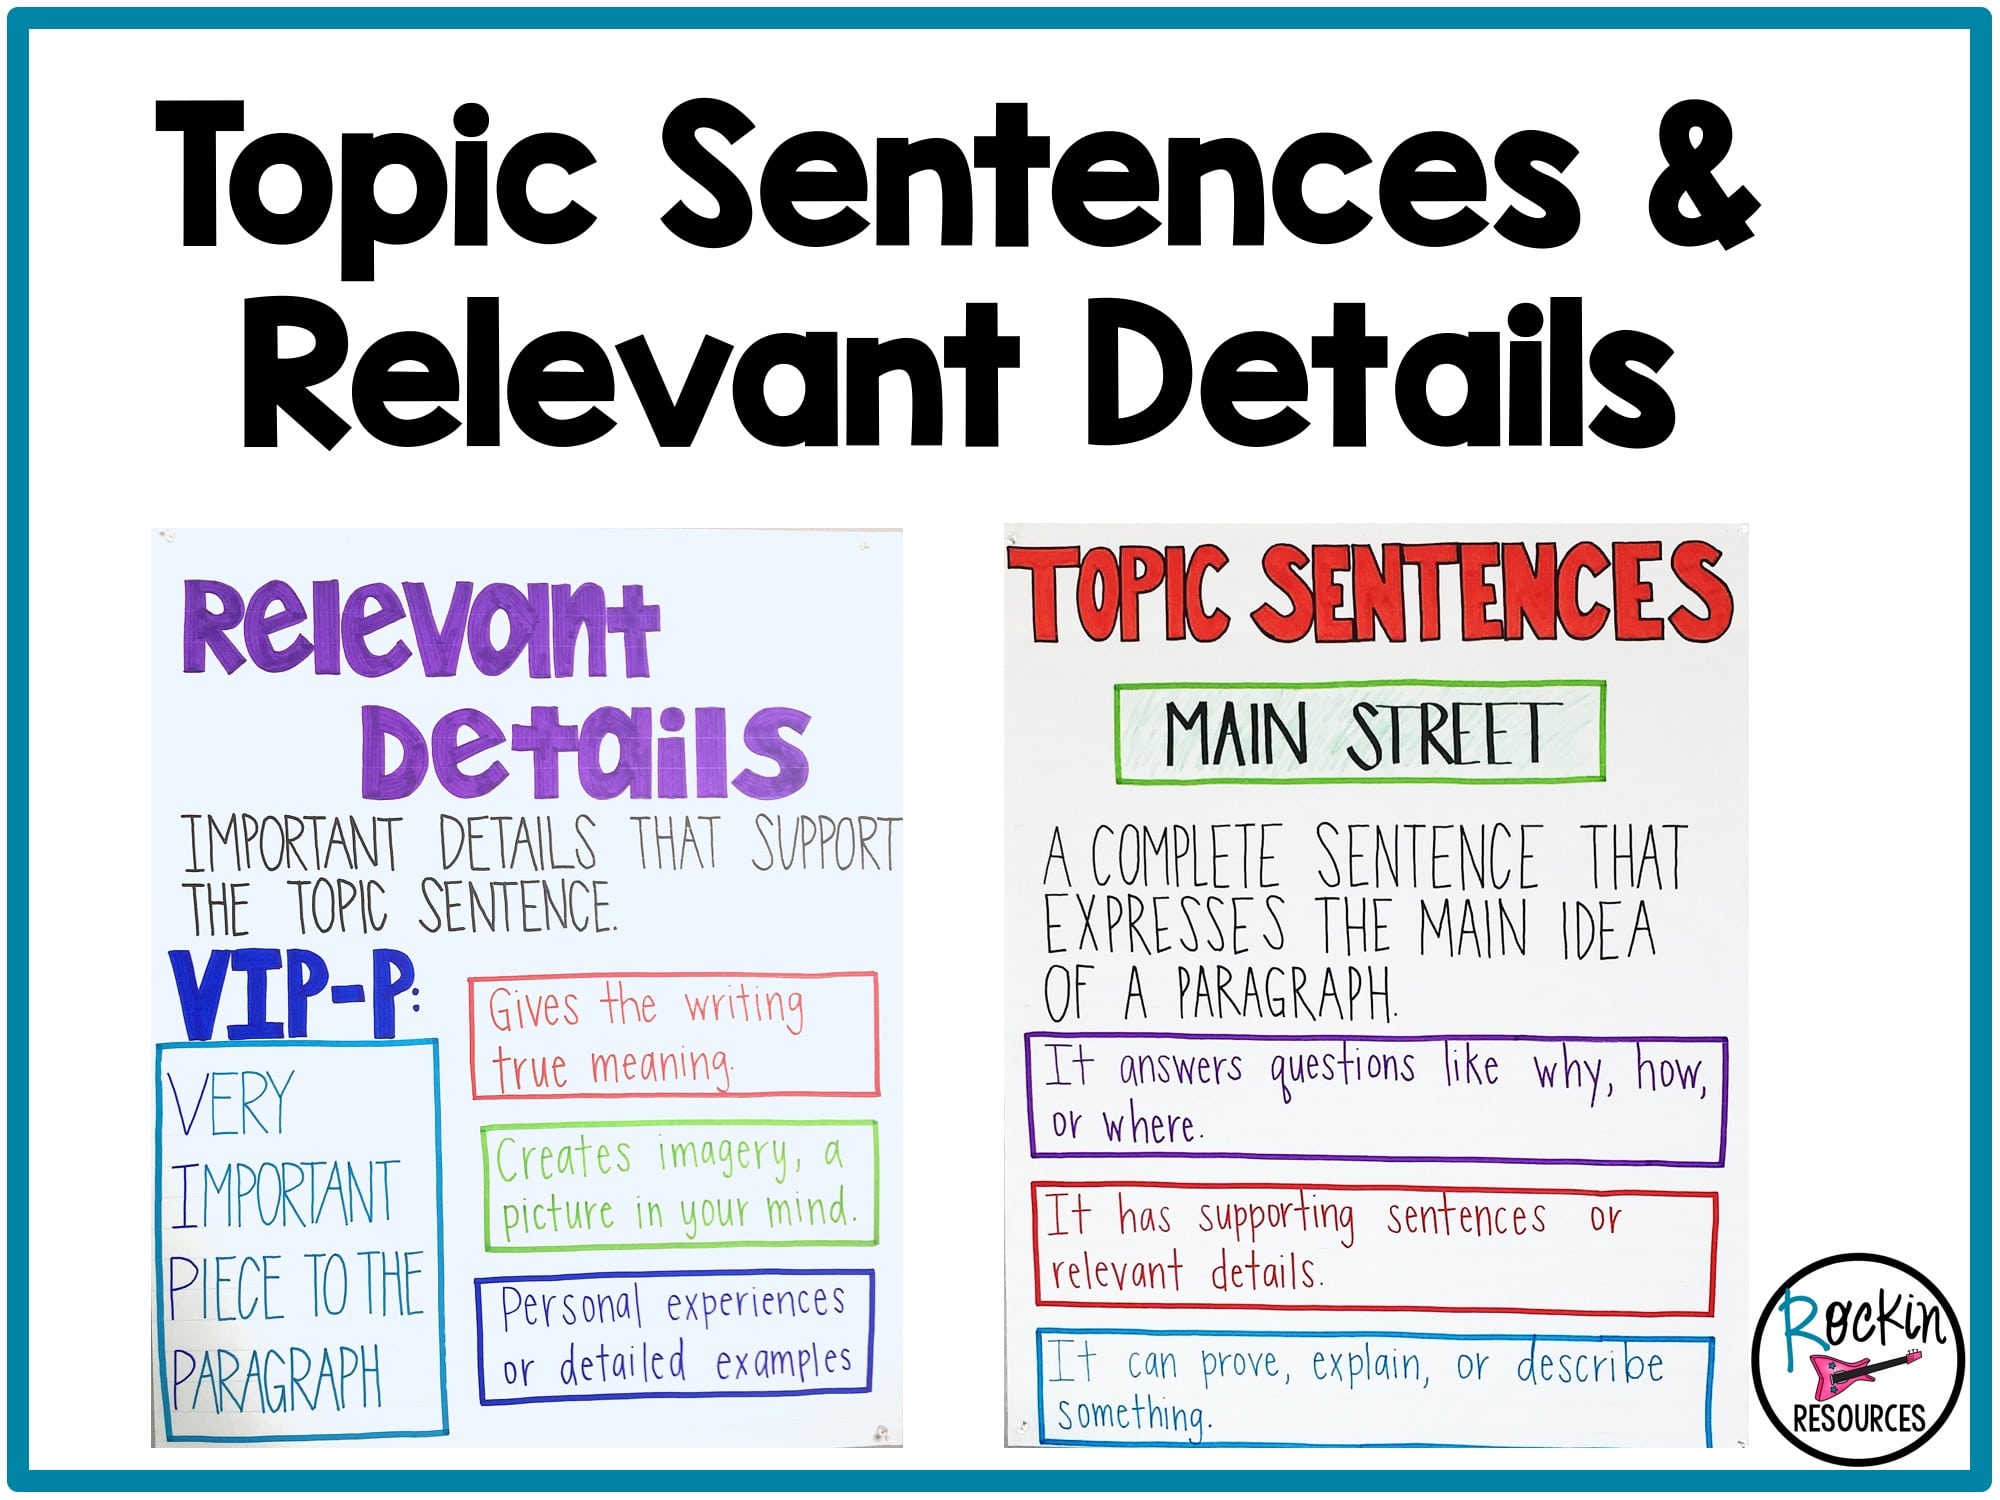 topic-sentences-and-relevant-details-rockin-resources